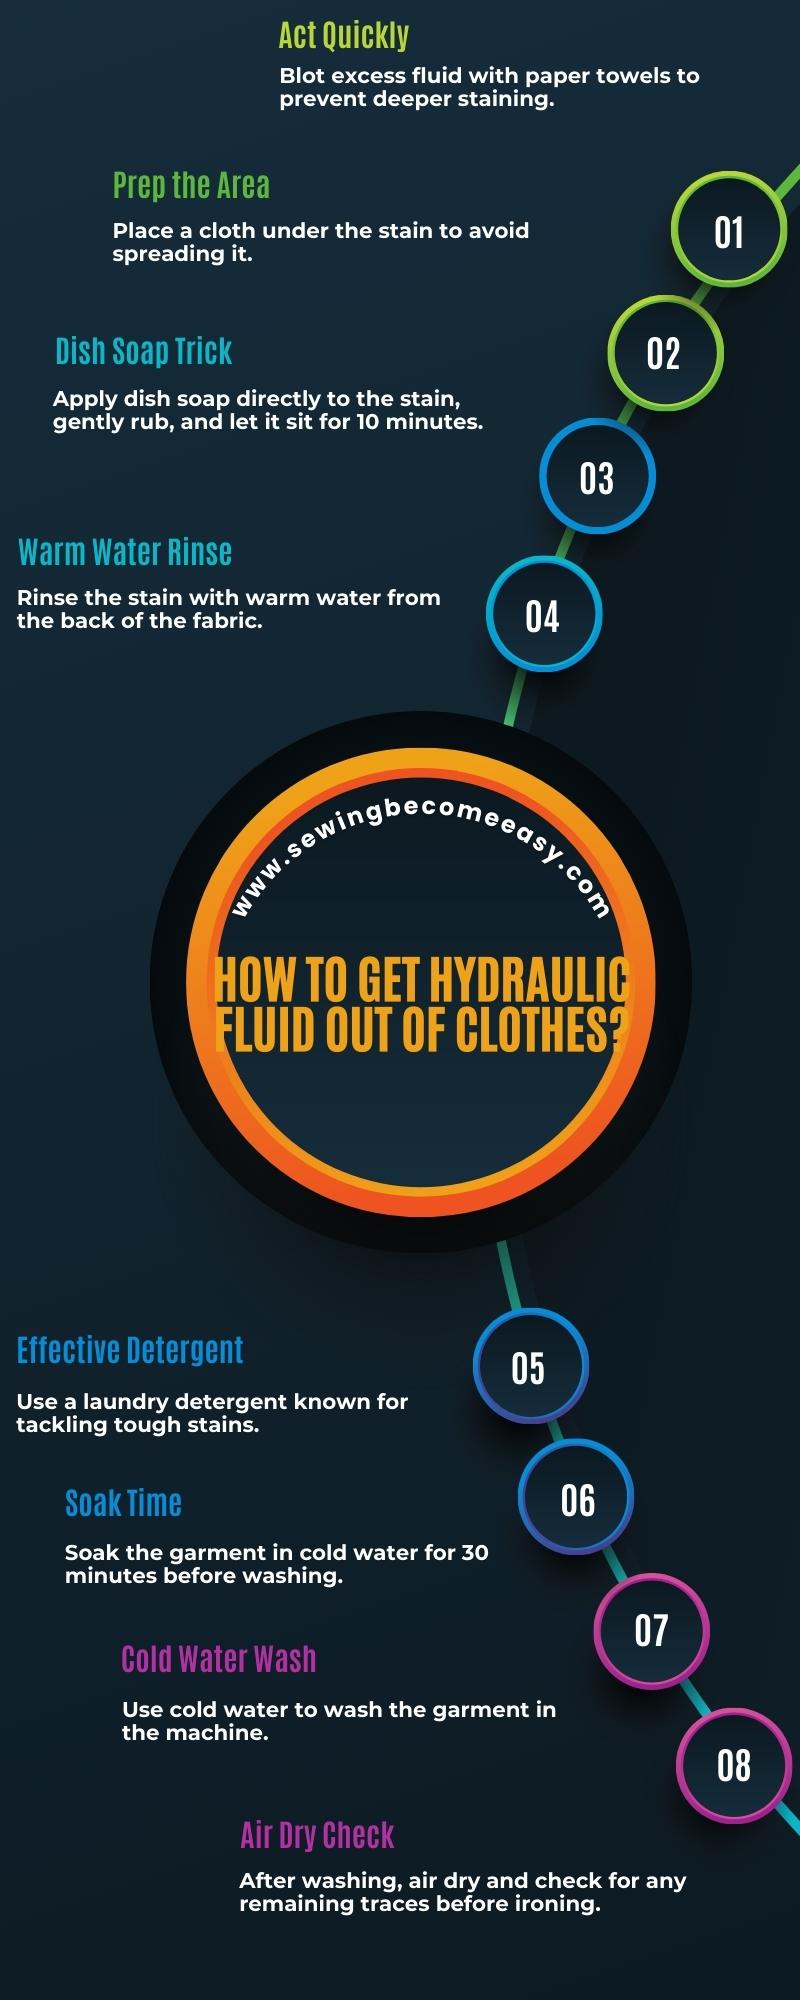 How to Get Hydraulic Fluid Out of Clothes